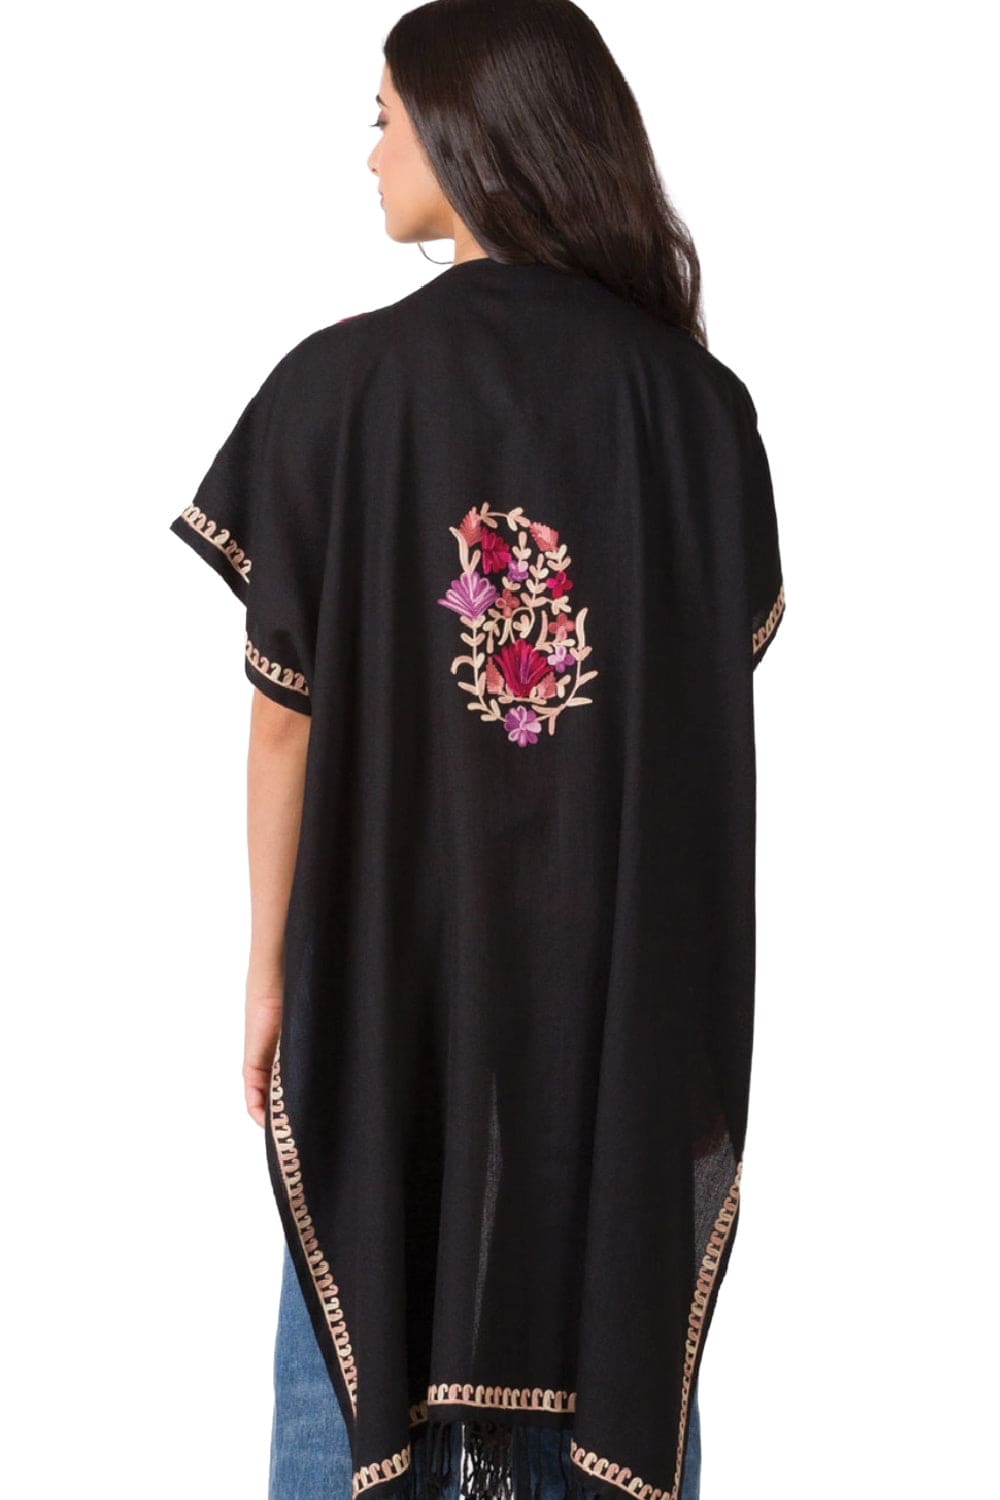 Women's Kaftan with pink and red embroidery.